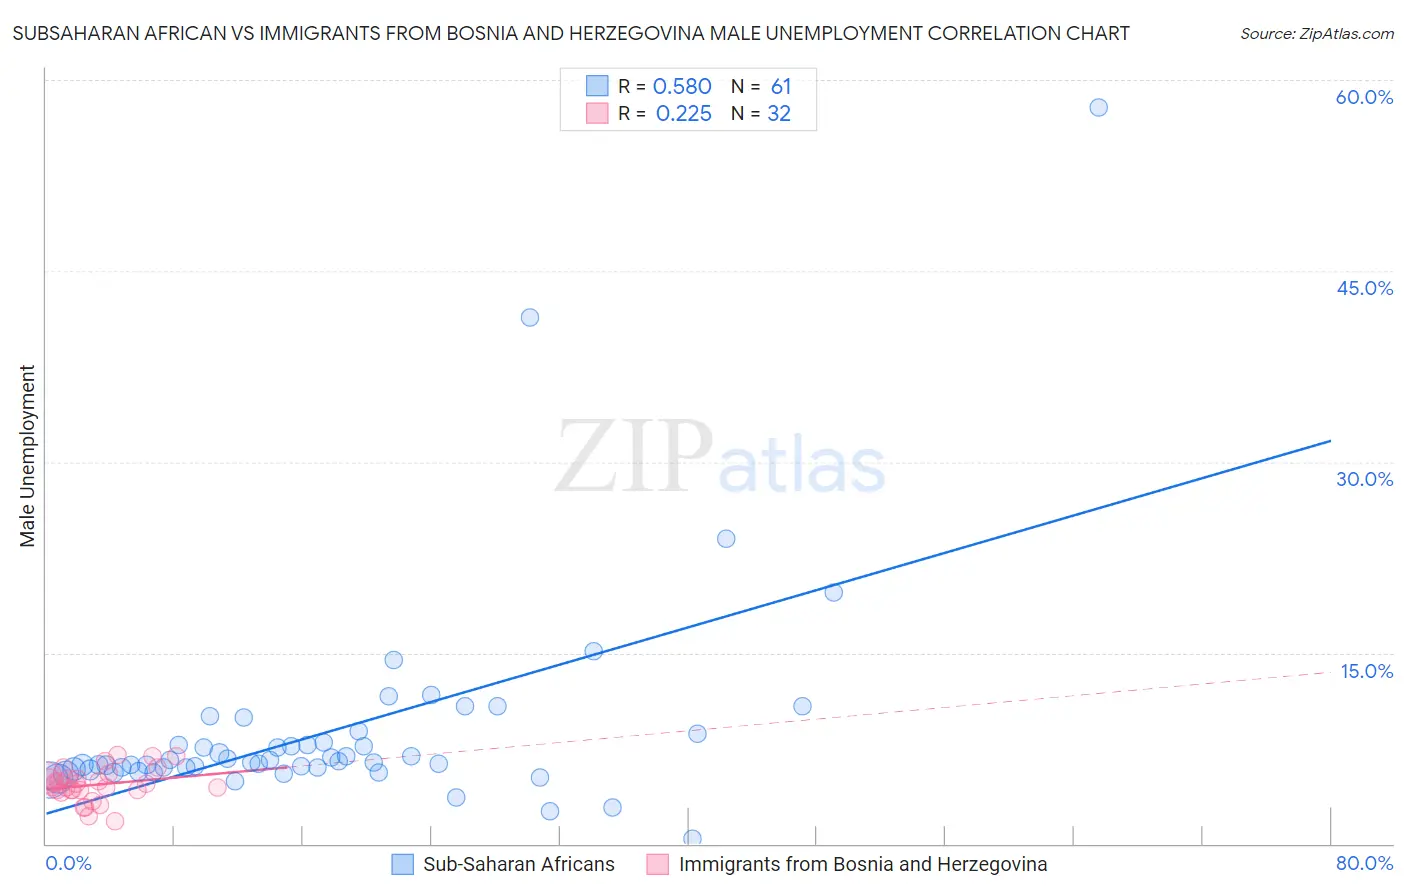 Subsaharan African vs Immigrants from Bosnia and Herzegovina Male Unemployment